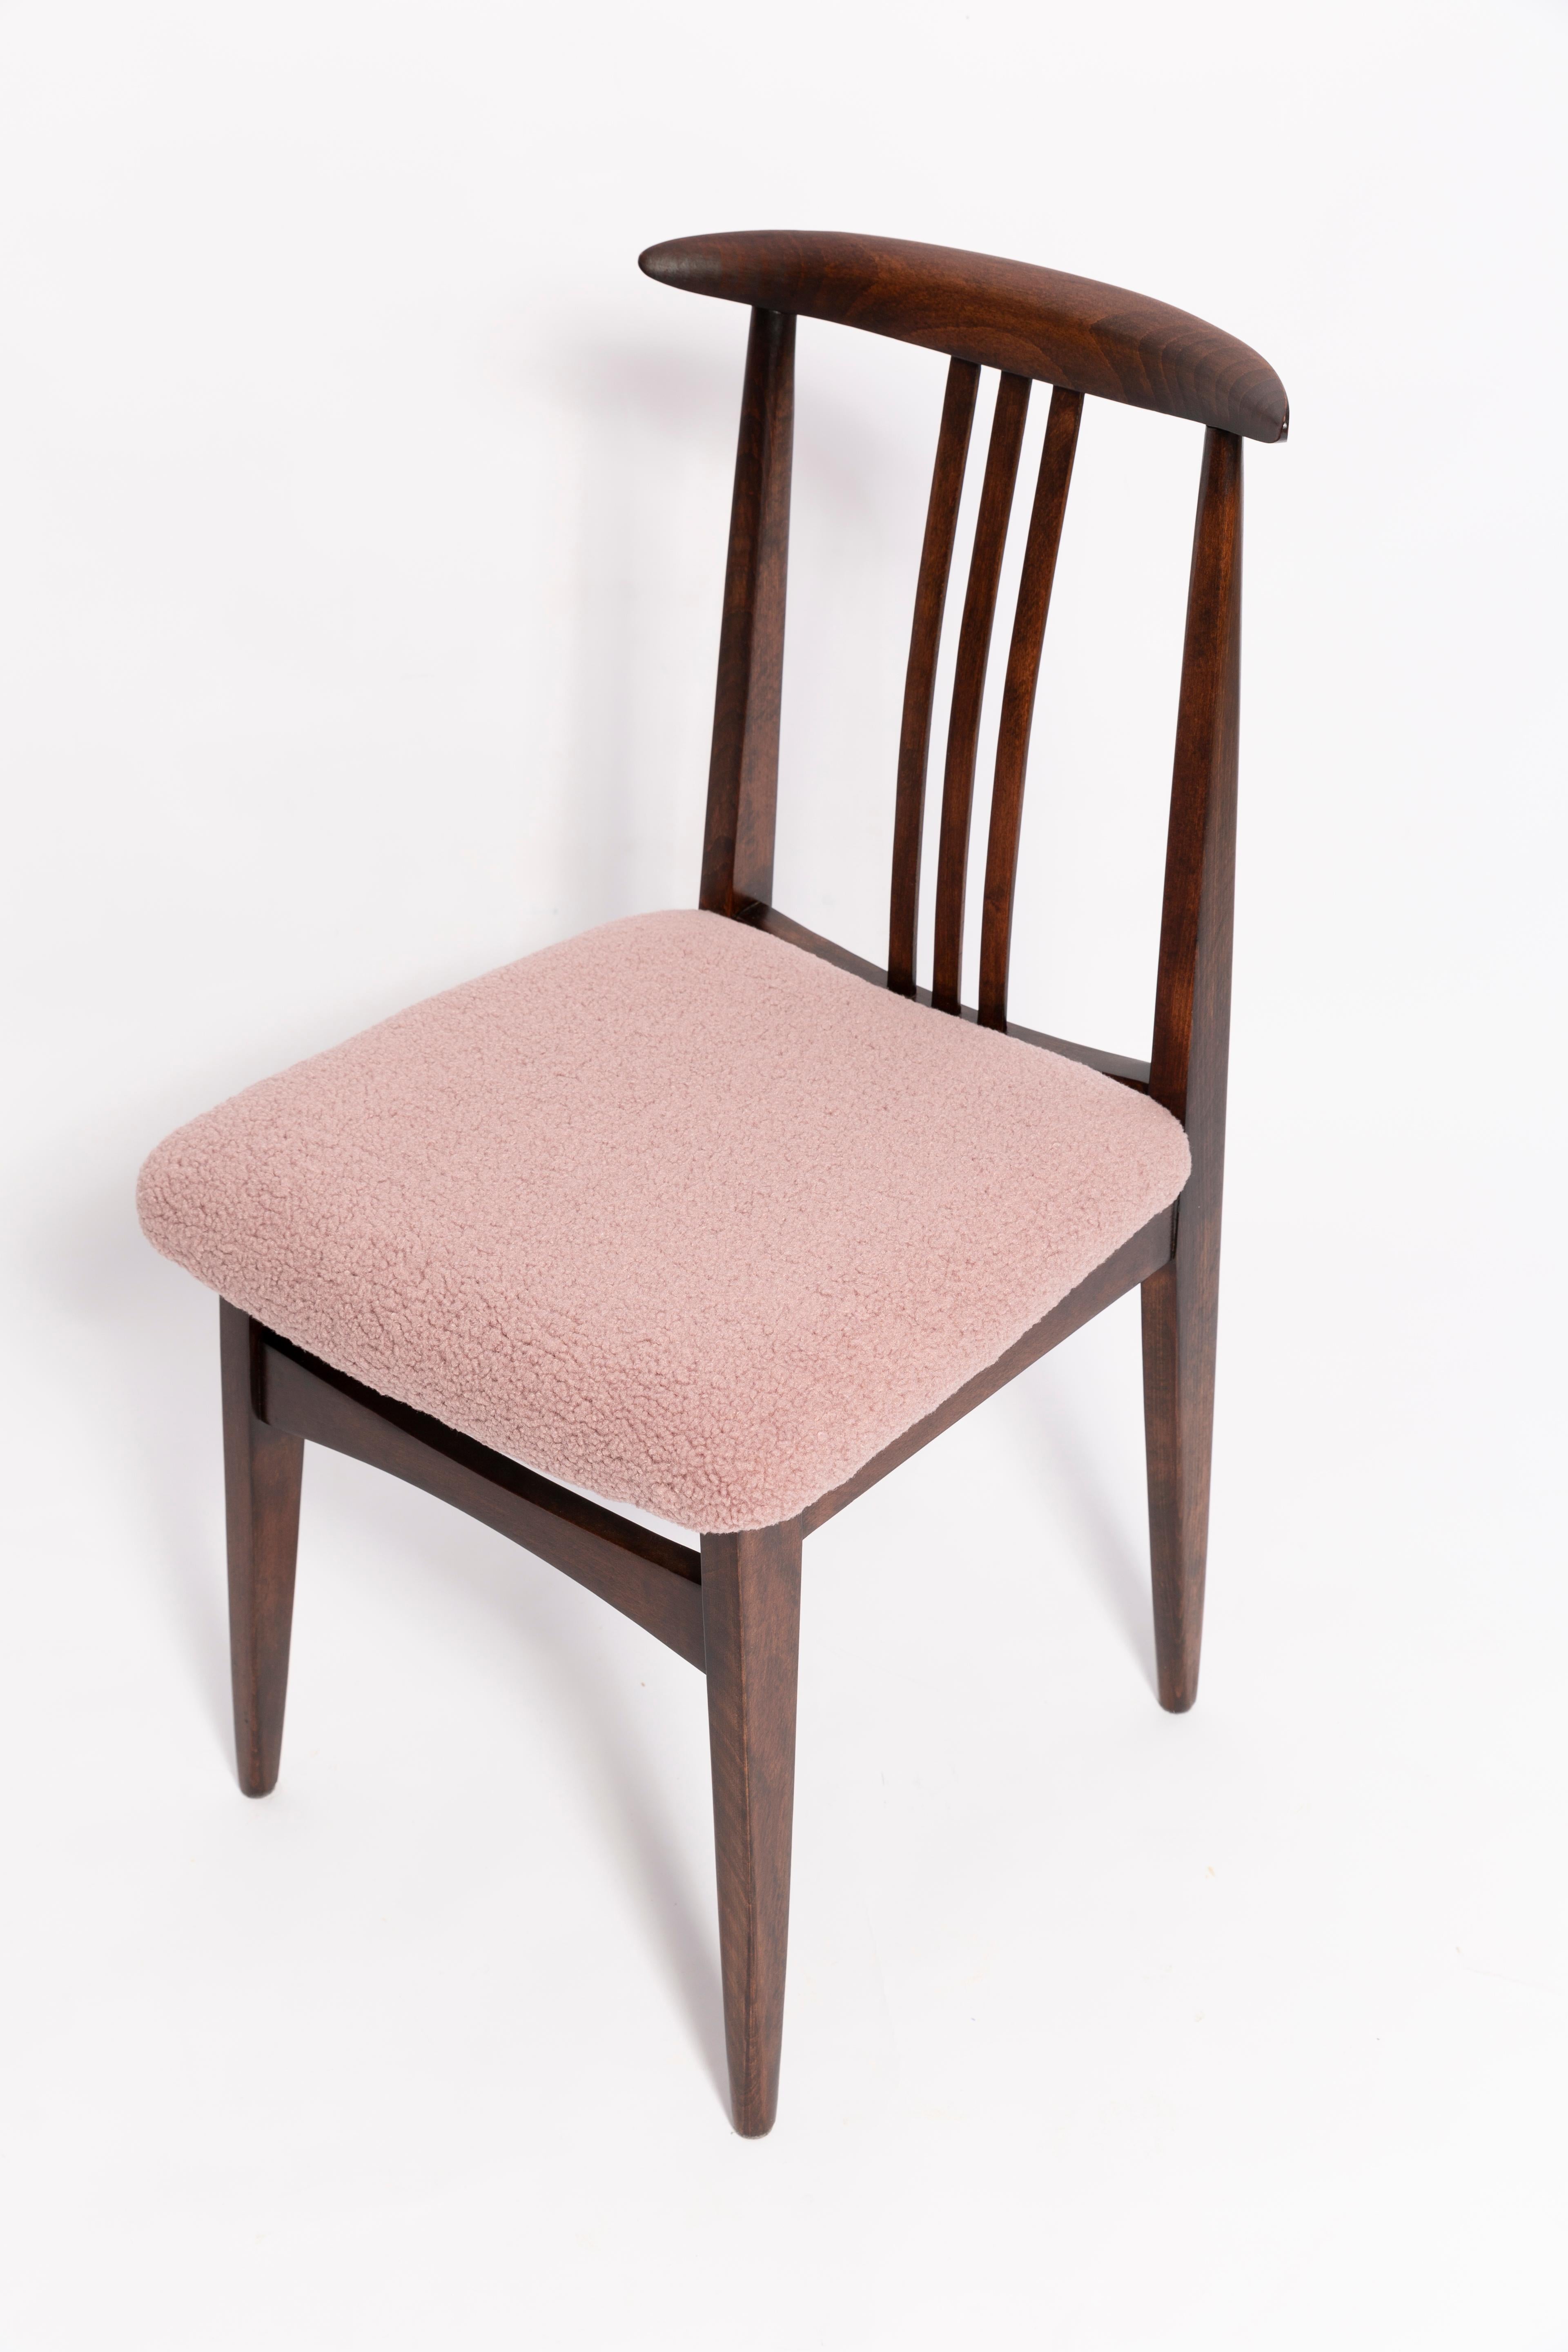 Mid-Century Pink Blush Boucle Chair, Walnut Wood, by M. Zielinski, Europe, 1960s For Sale 2